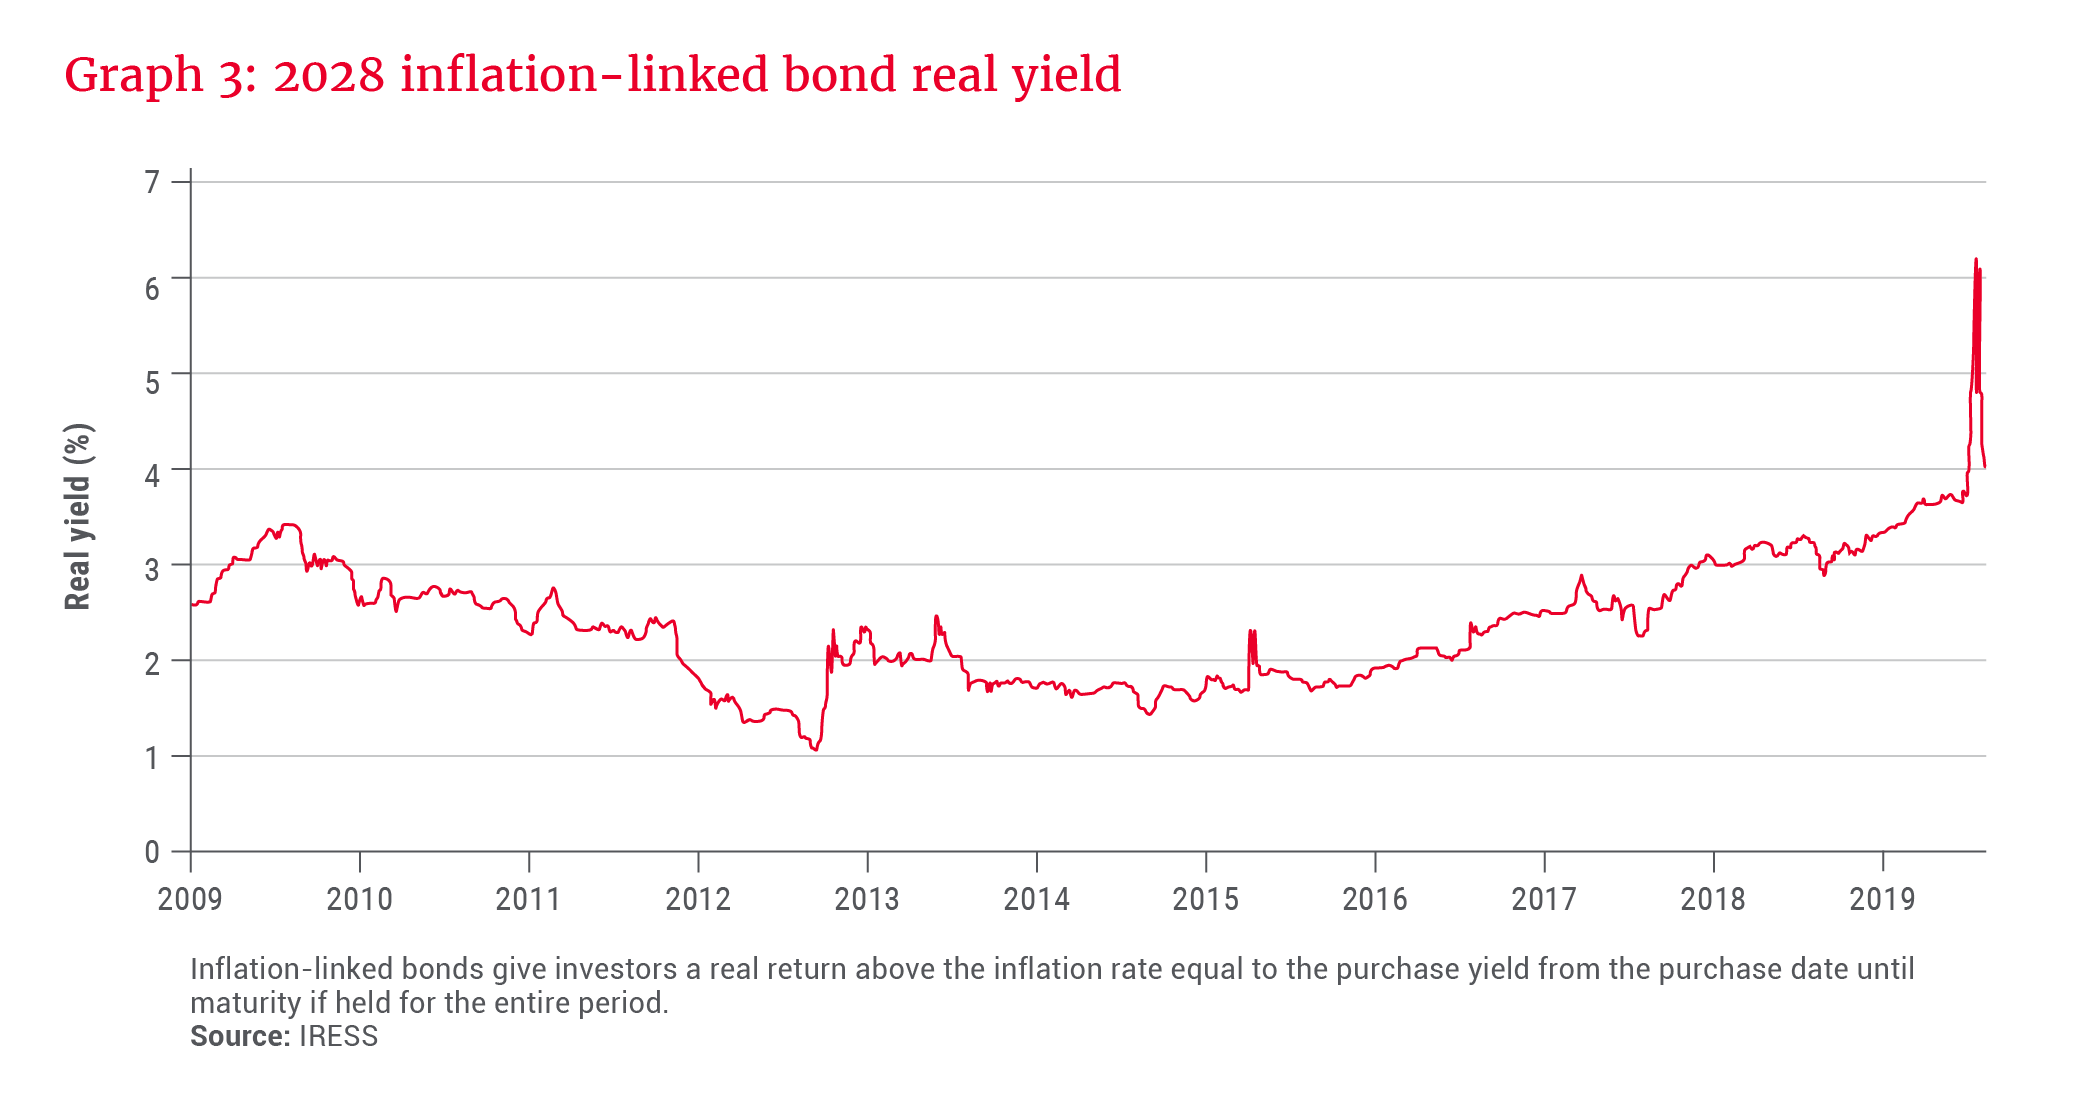 2028 Inflation-linked bond real yield - Allan Gray